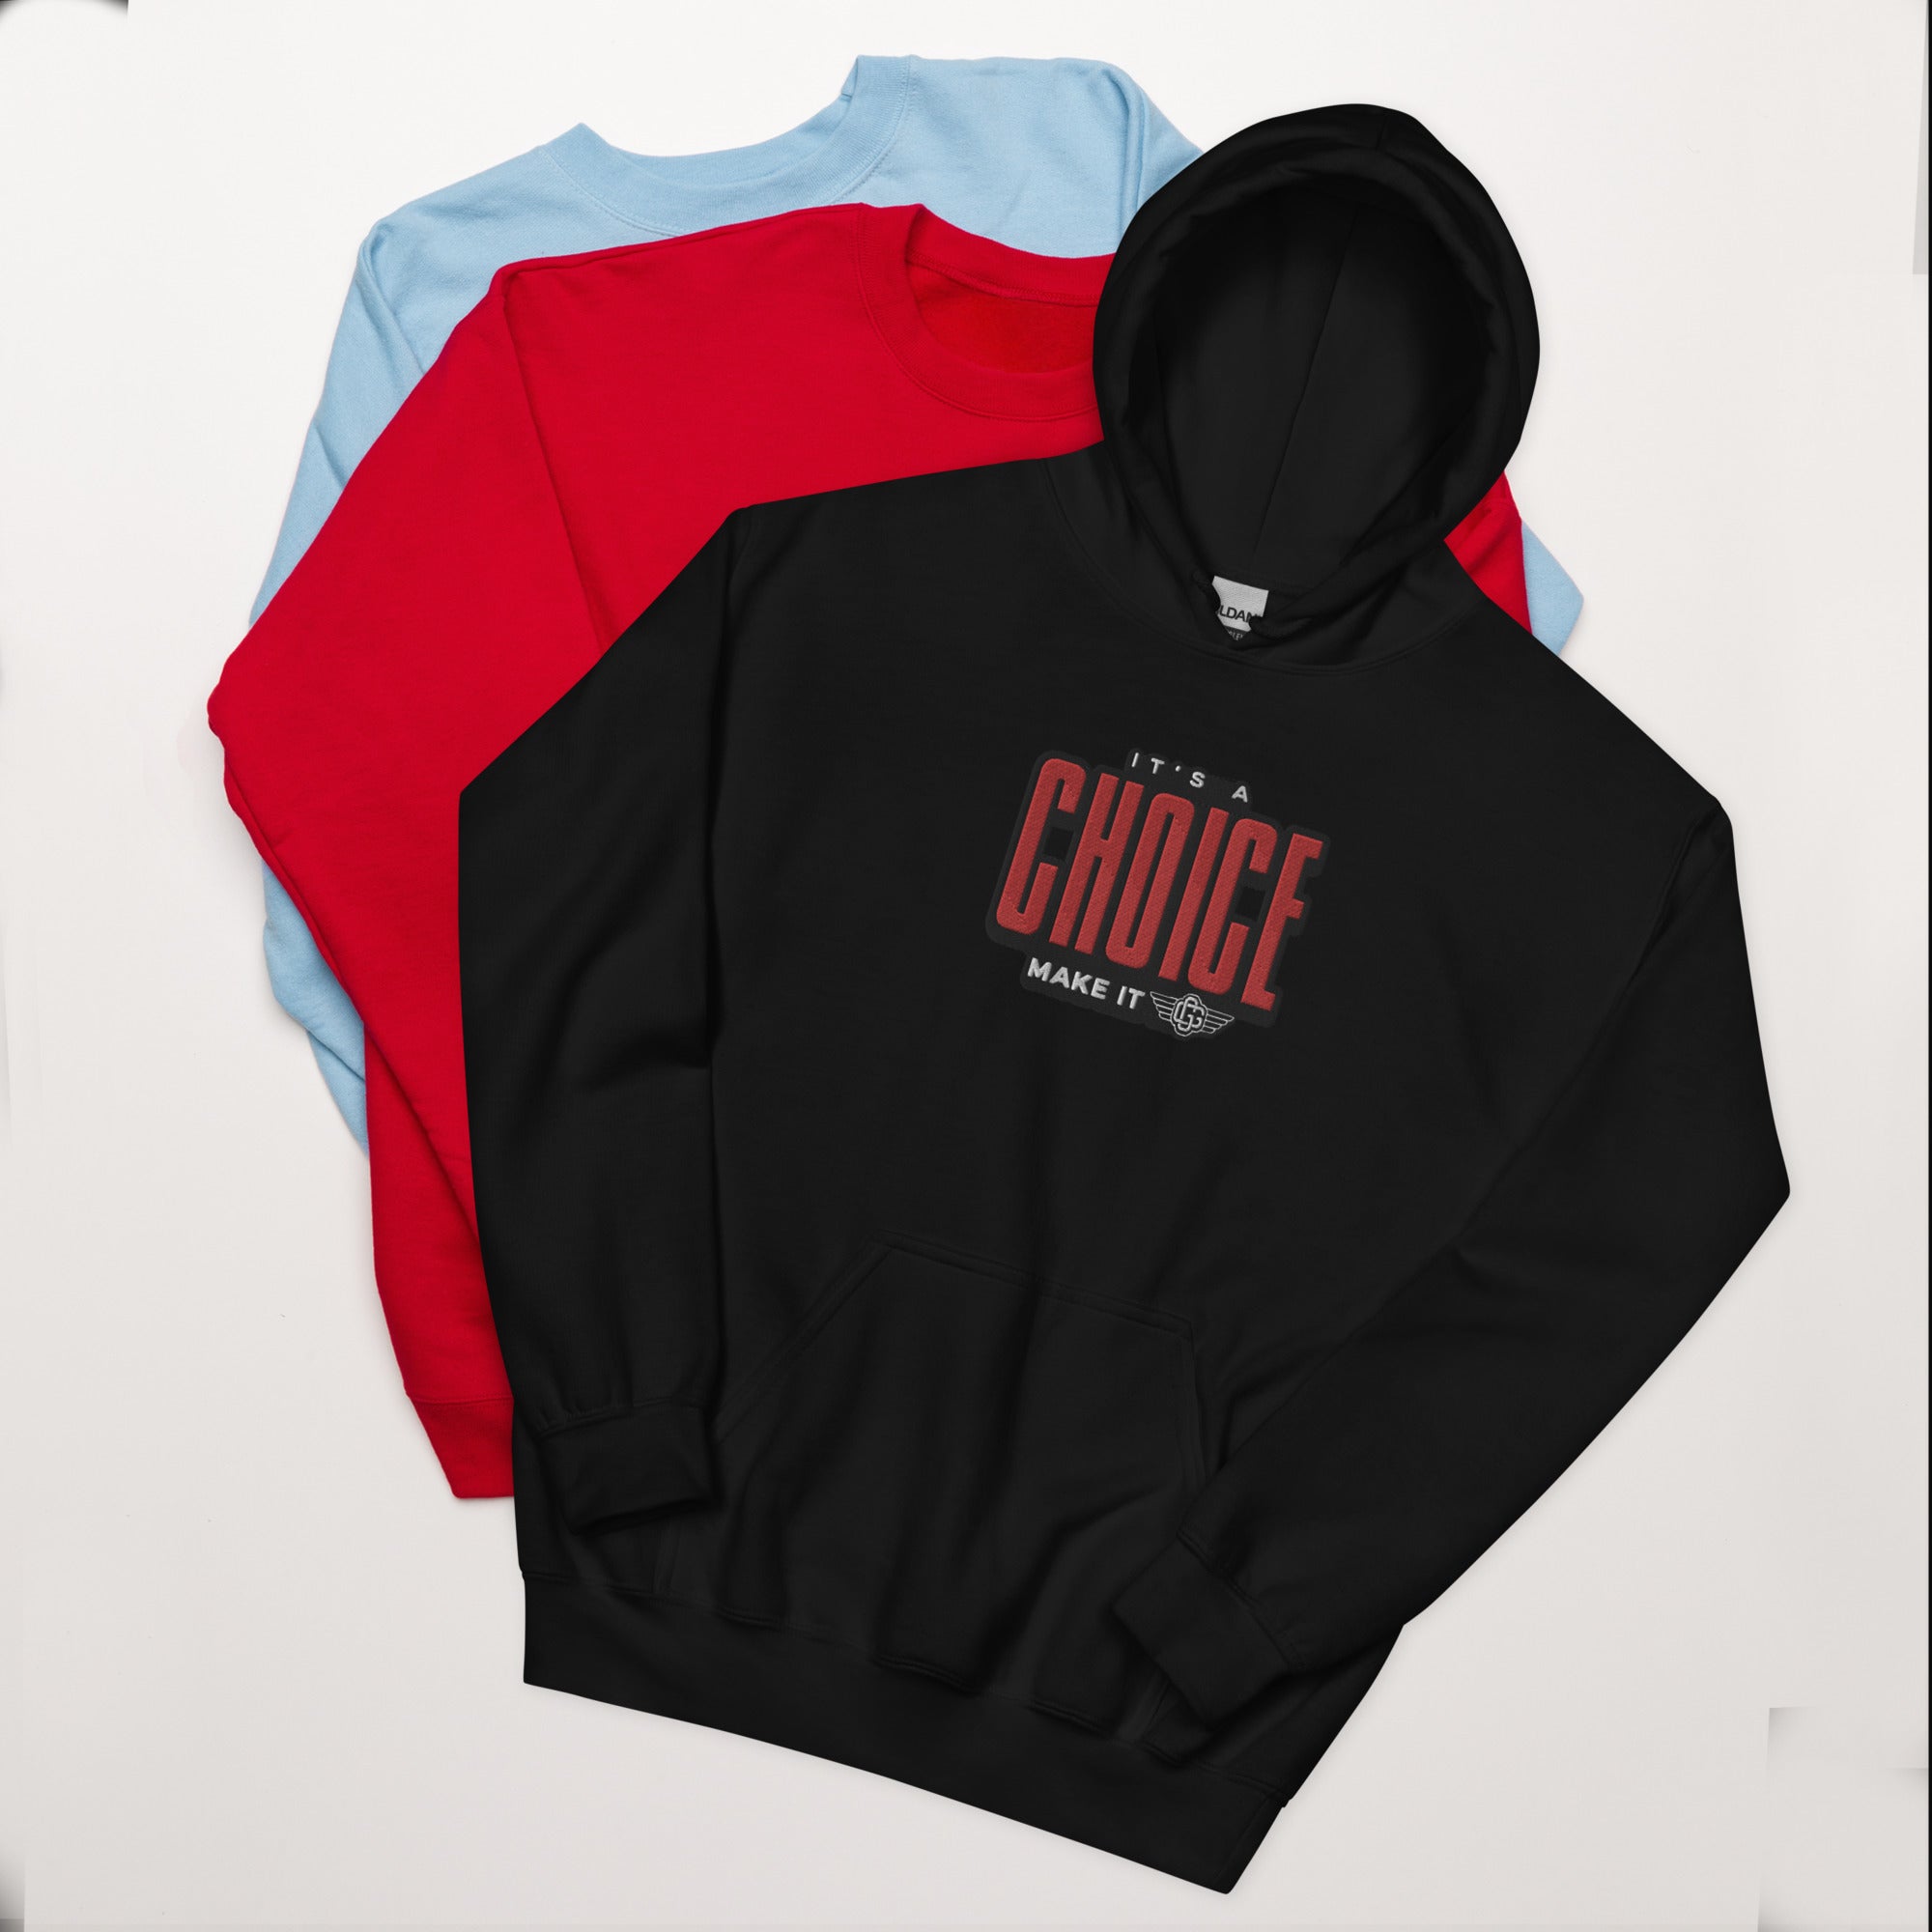 pull over, hoodie, hoodies for unisex, hoodie for unisex, hoodies wholesale, unisex hoodie, are essential hoodies unisex, are essentials hoodies unisex, is essentials unisex, essentials hoodie women's sizing, is fear of god essentials unisex, essential hoodie size, essentials size chart, essentials hoodie sizing